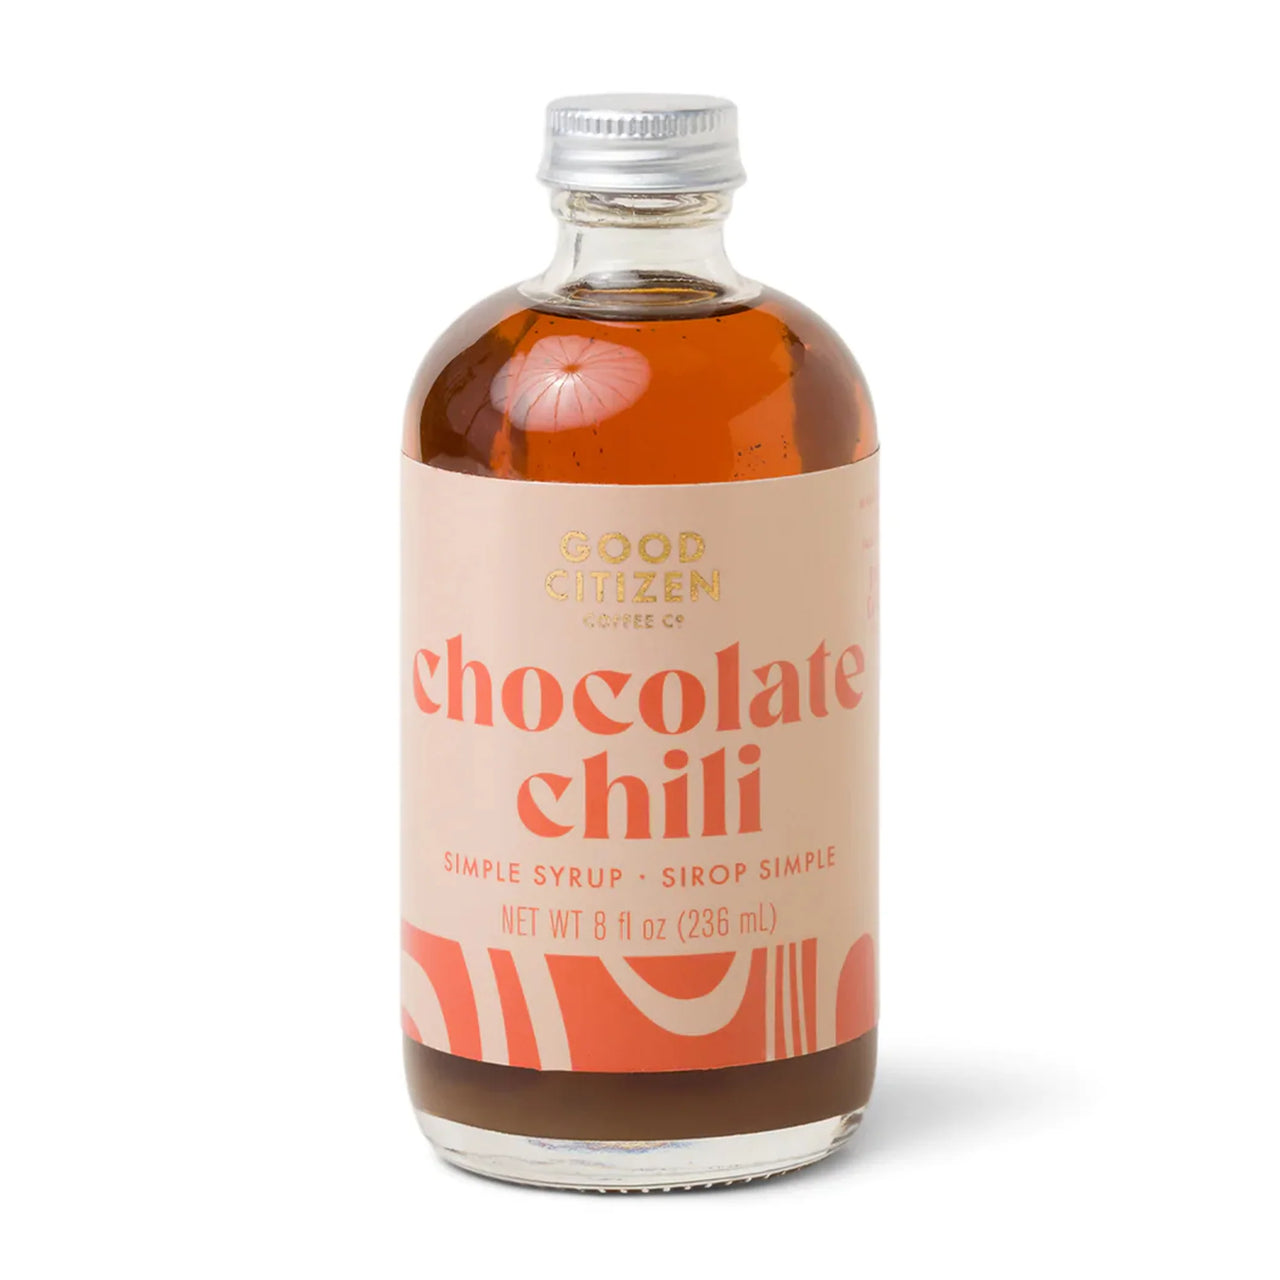 Chocolate Chili Simple Syrup